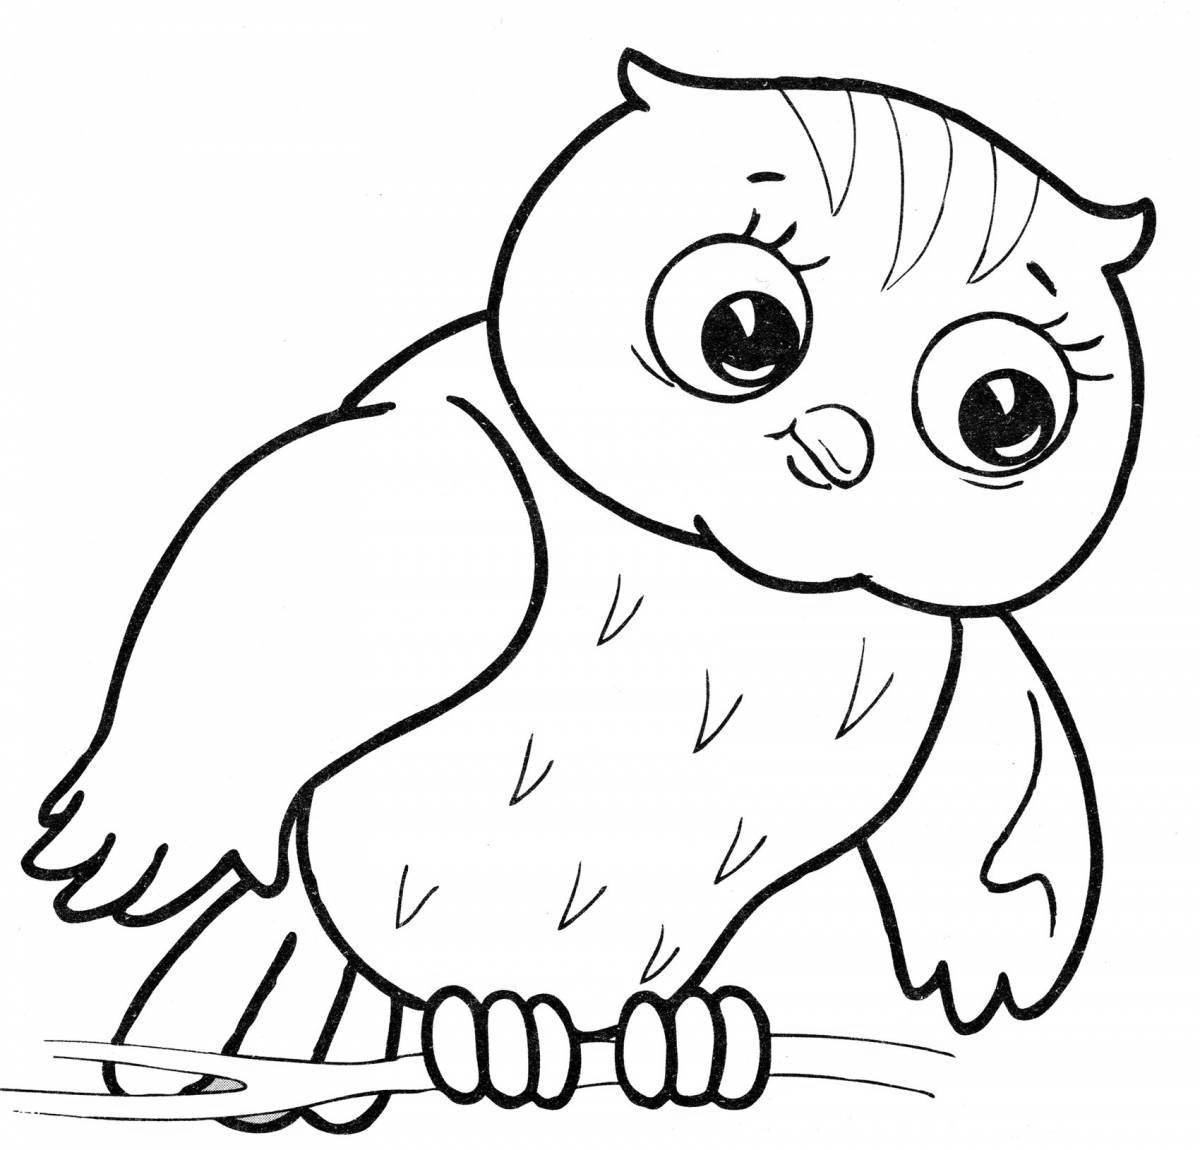 Sparkling owlet coloring page